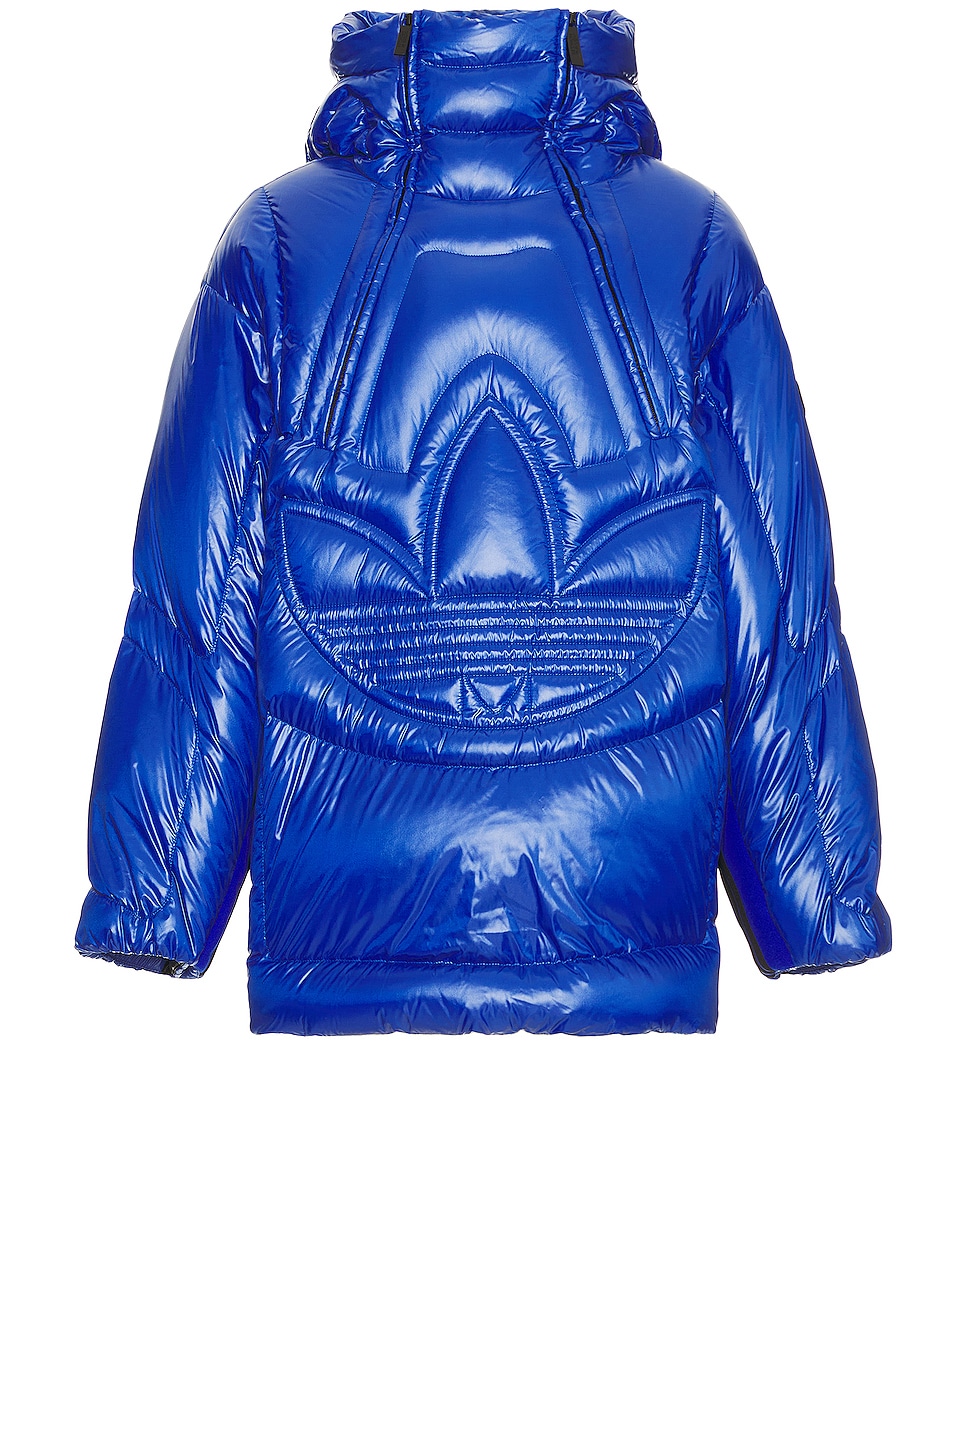 Image 1 of Moncler Genius x Adidas Chambery Jacket in Blue